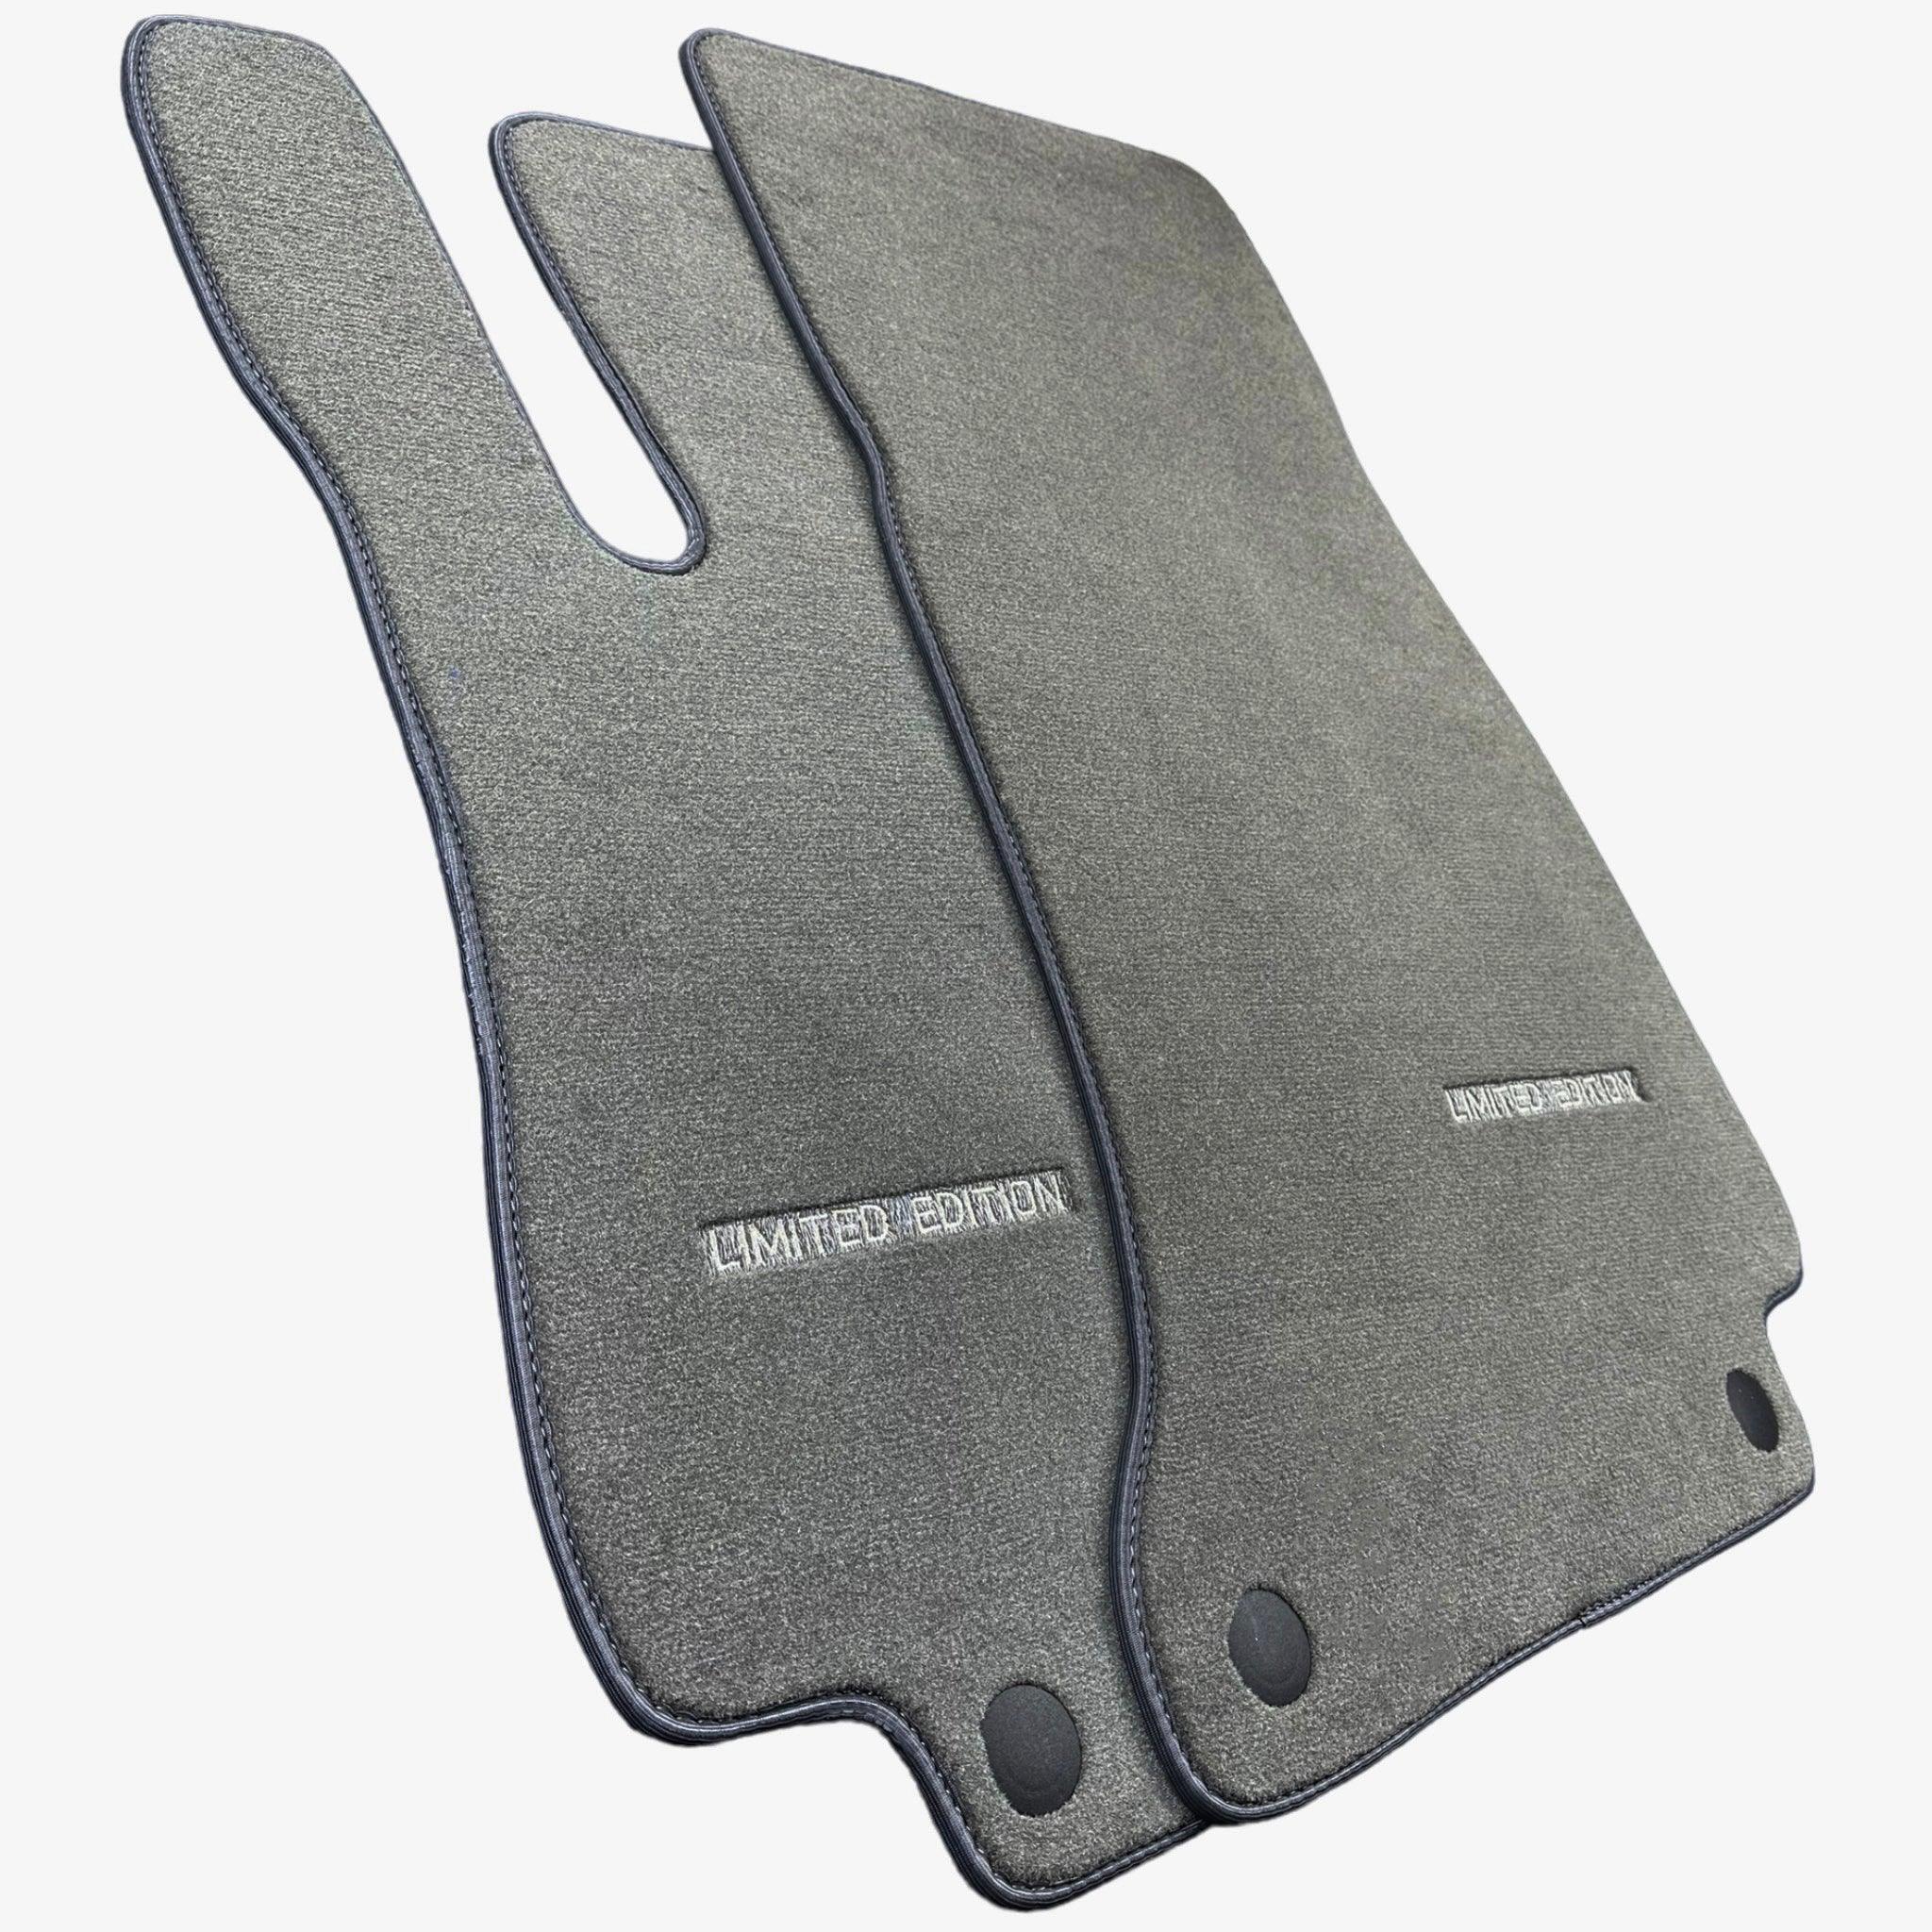 Gray Floor Mats For Mercedes Benz T-Class W420 (2022-2023) | Limited Edition